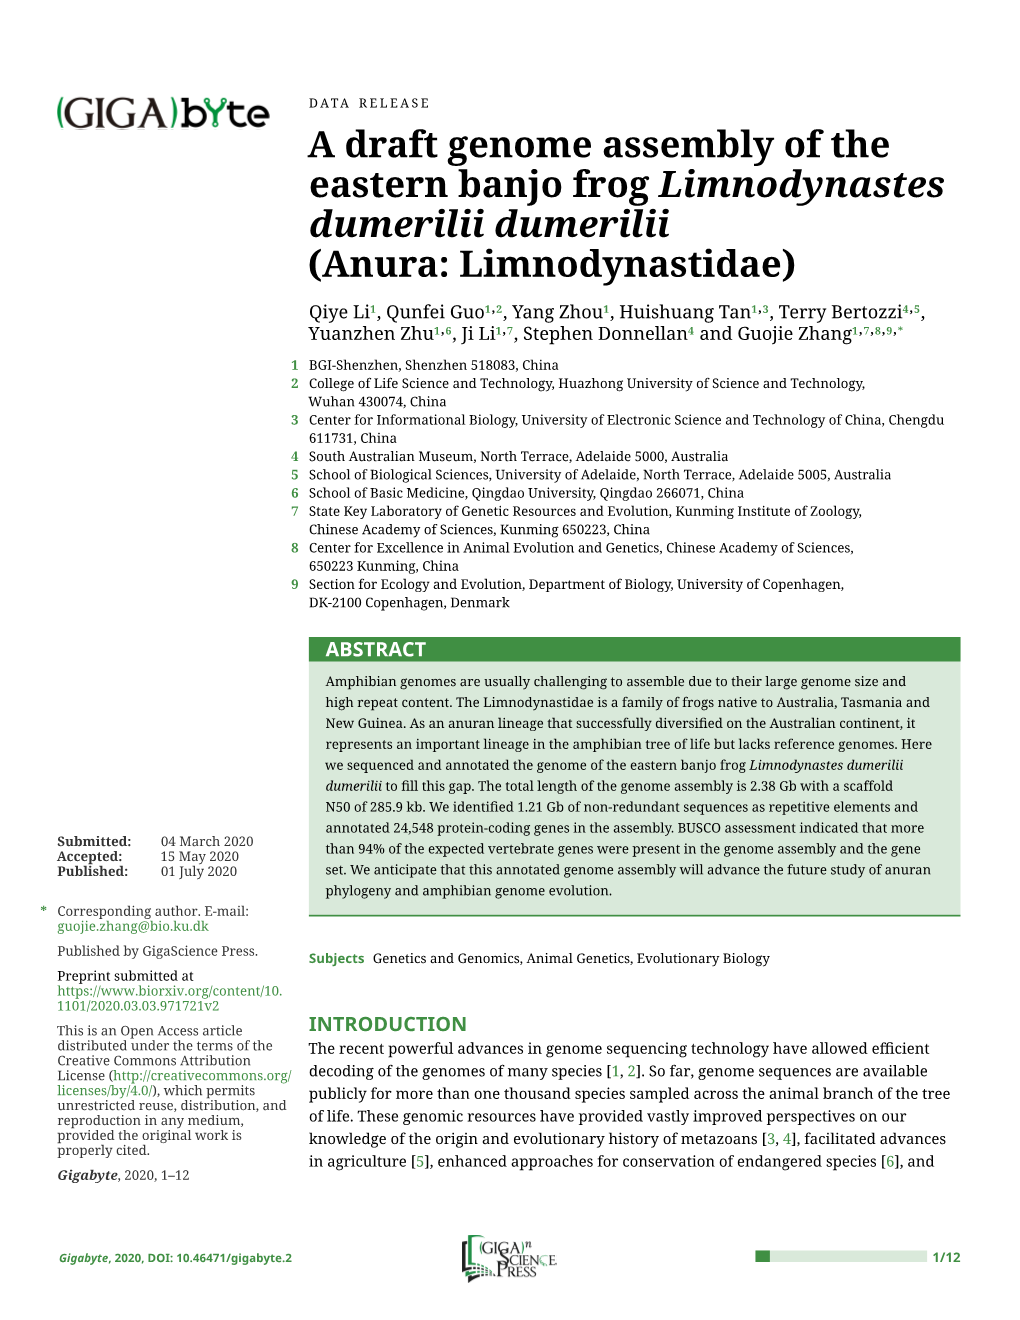 A Draft Genome Assembly of the Eastern Banjo Frog Limnodynastes